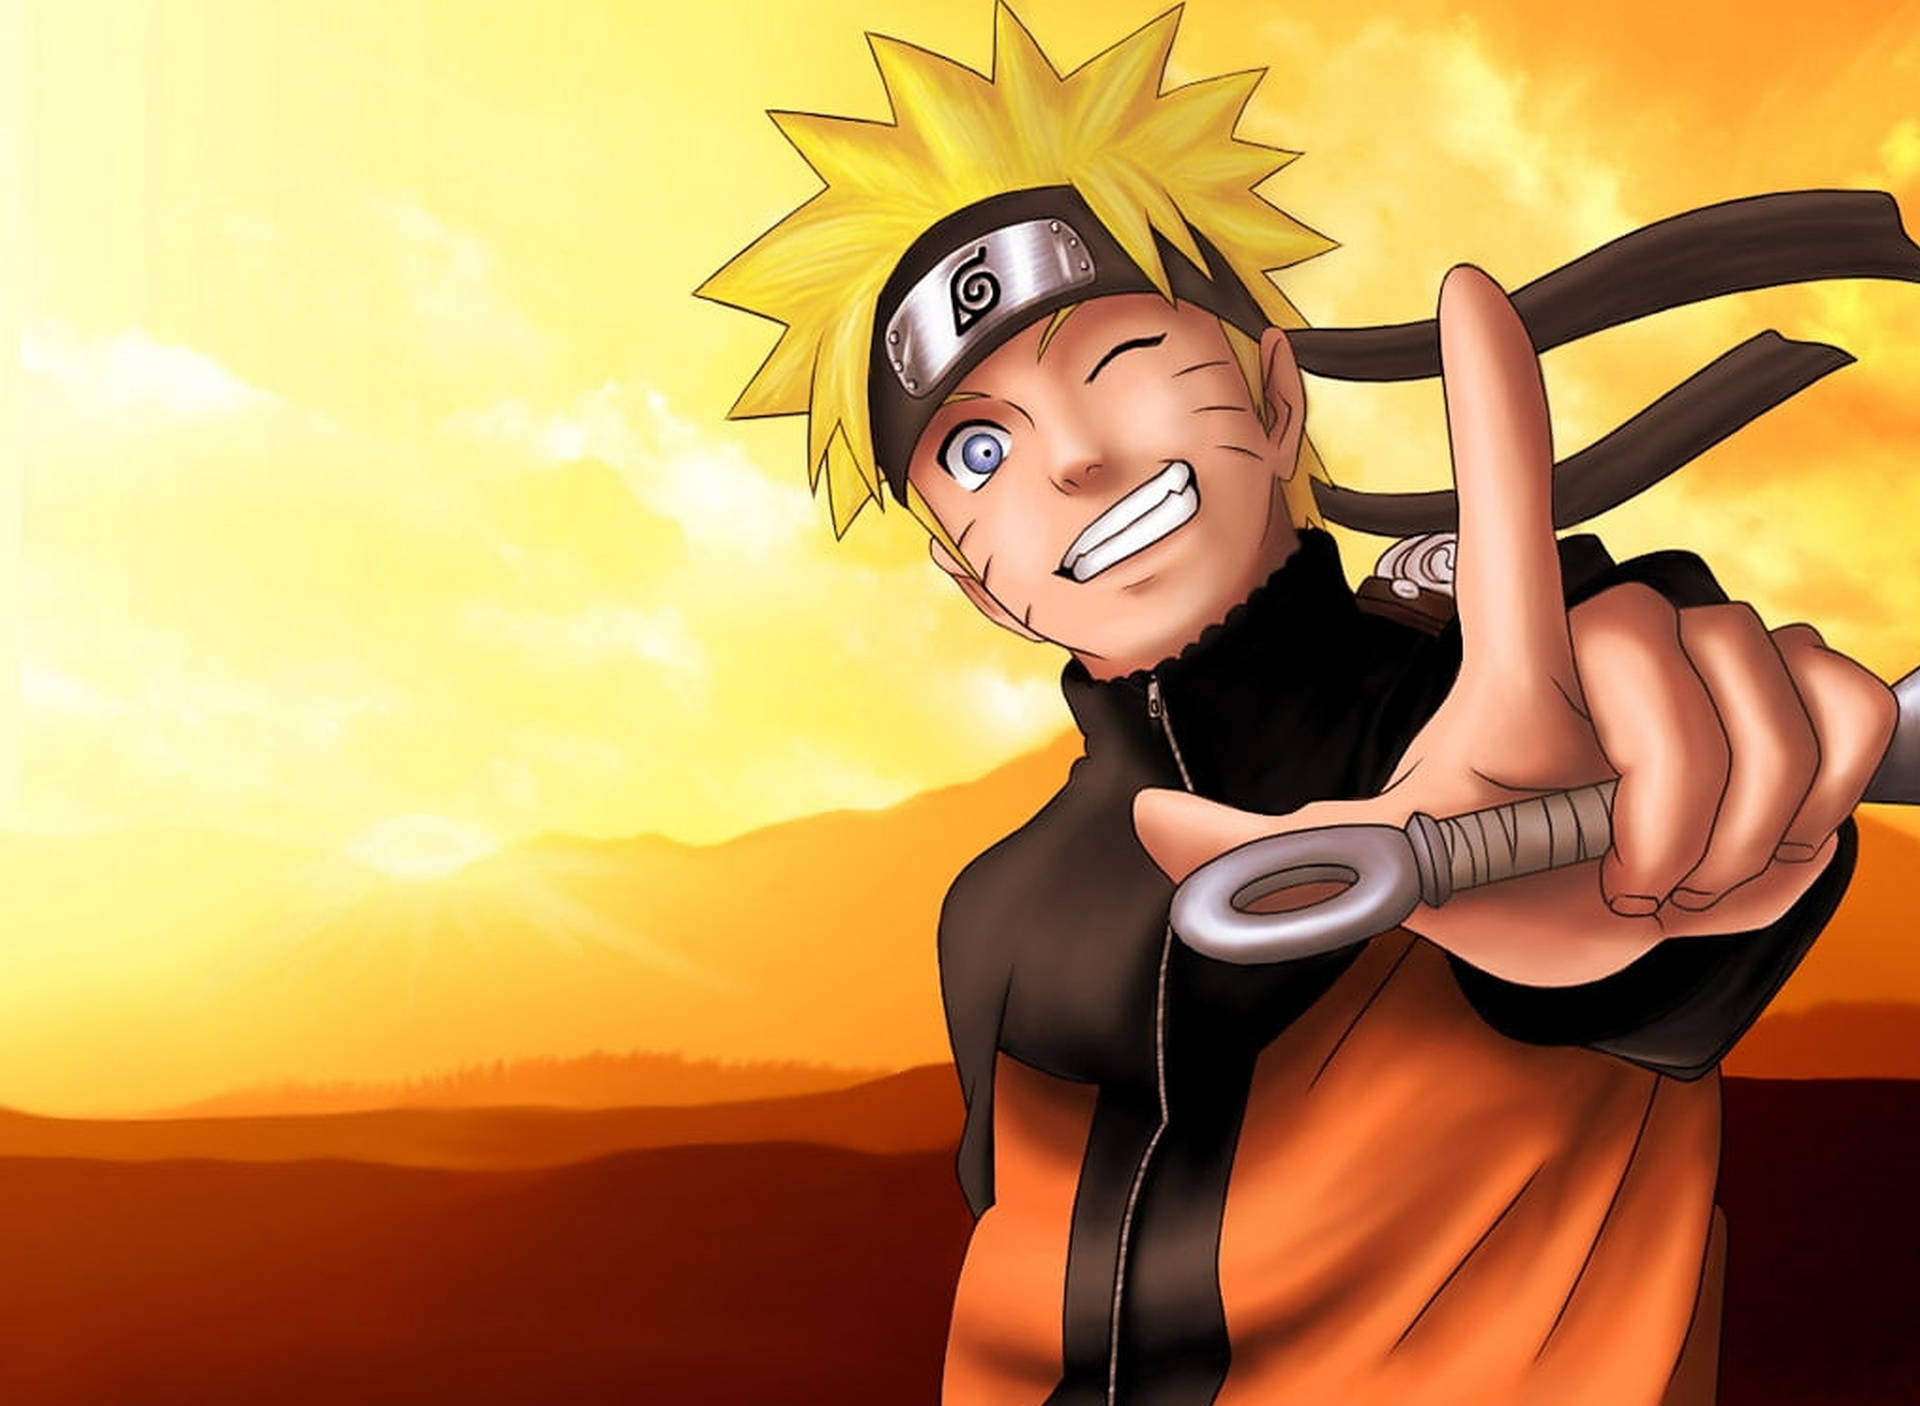 Moving Naruto L Sign Sunset Background